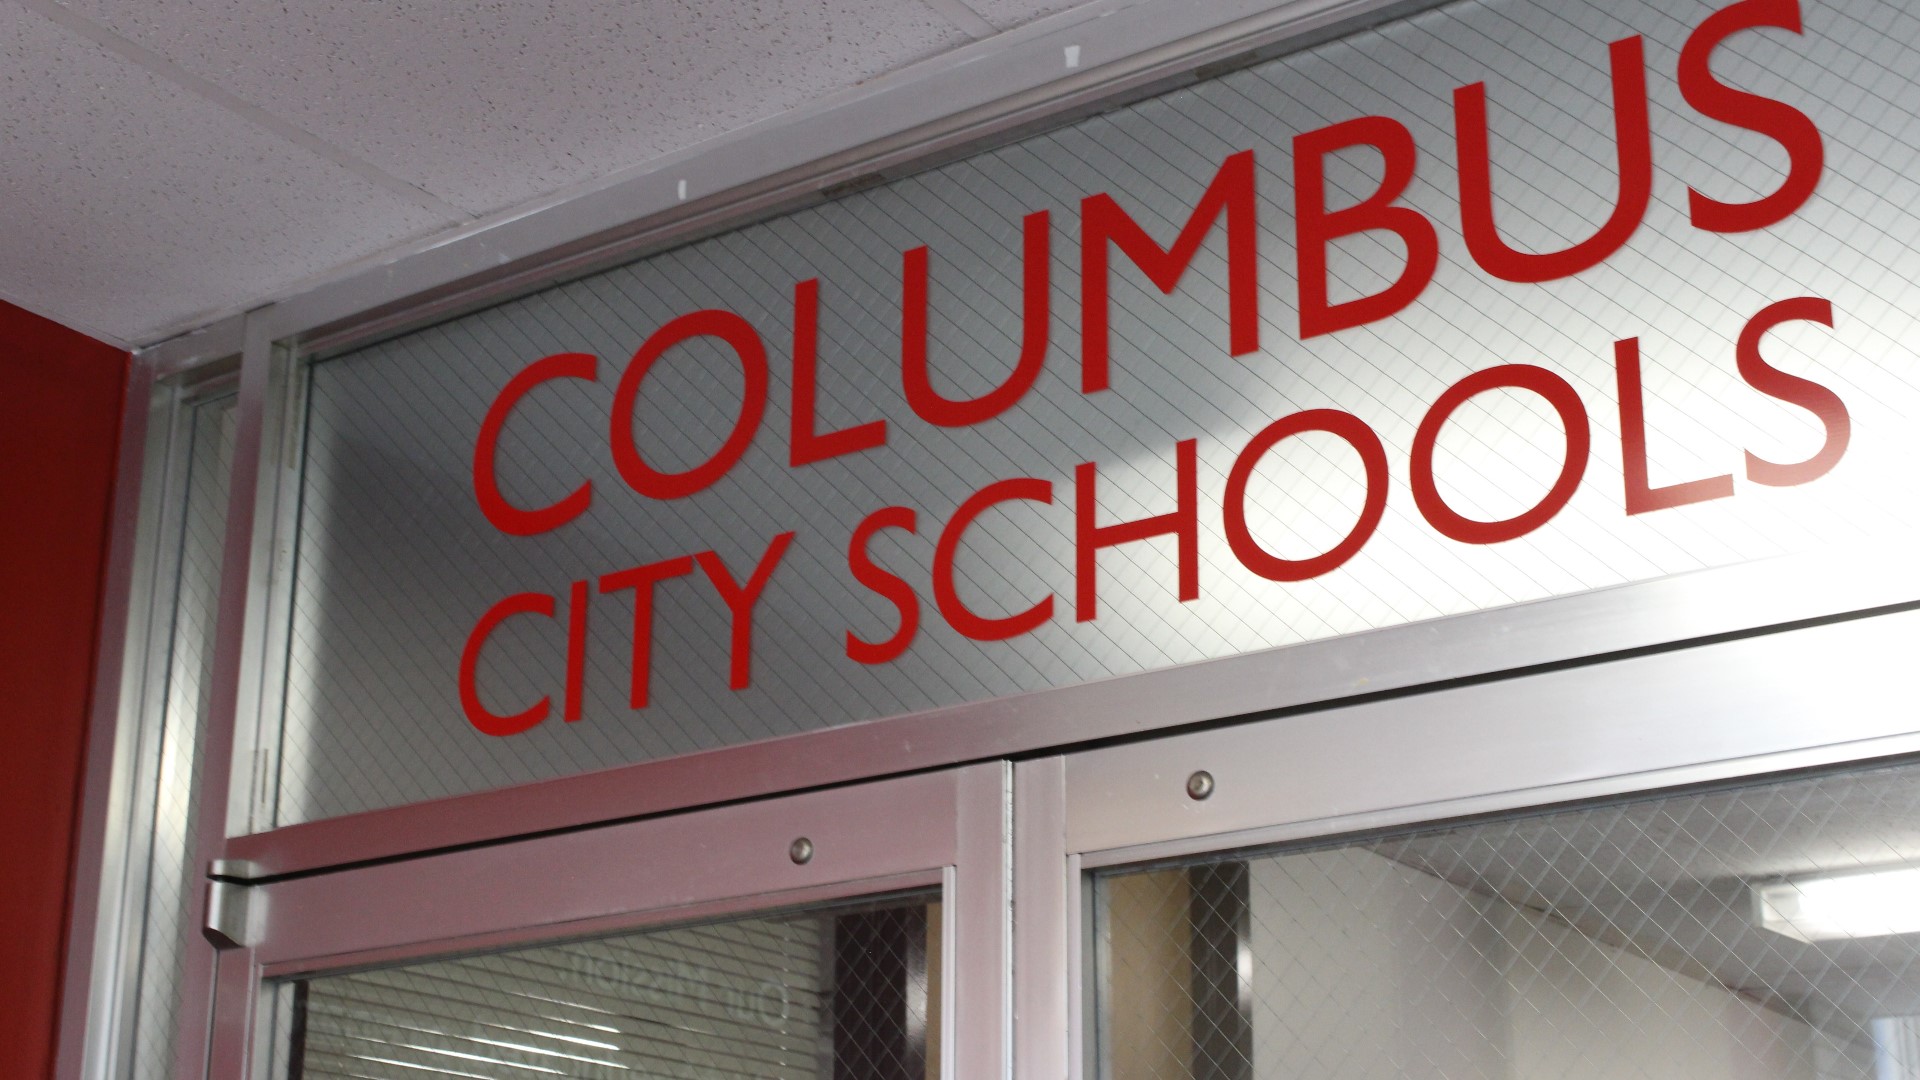 A list of potential Columbus City School buildings that could close will be presented to the school board on Tuesday.